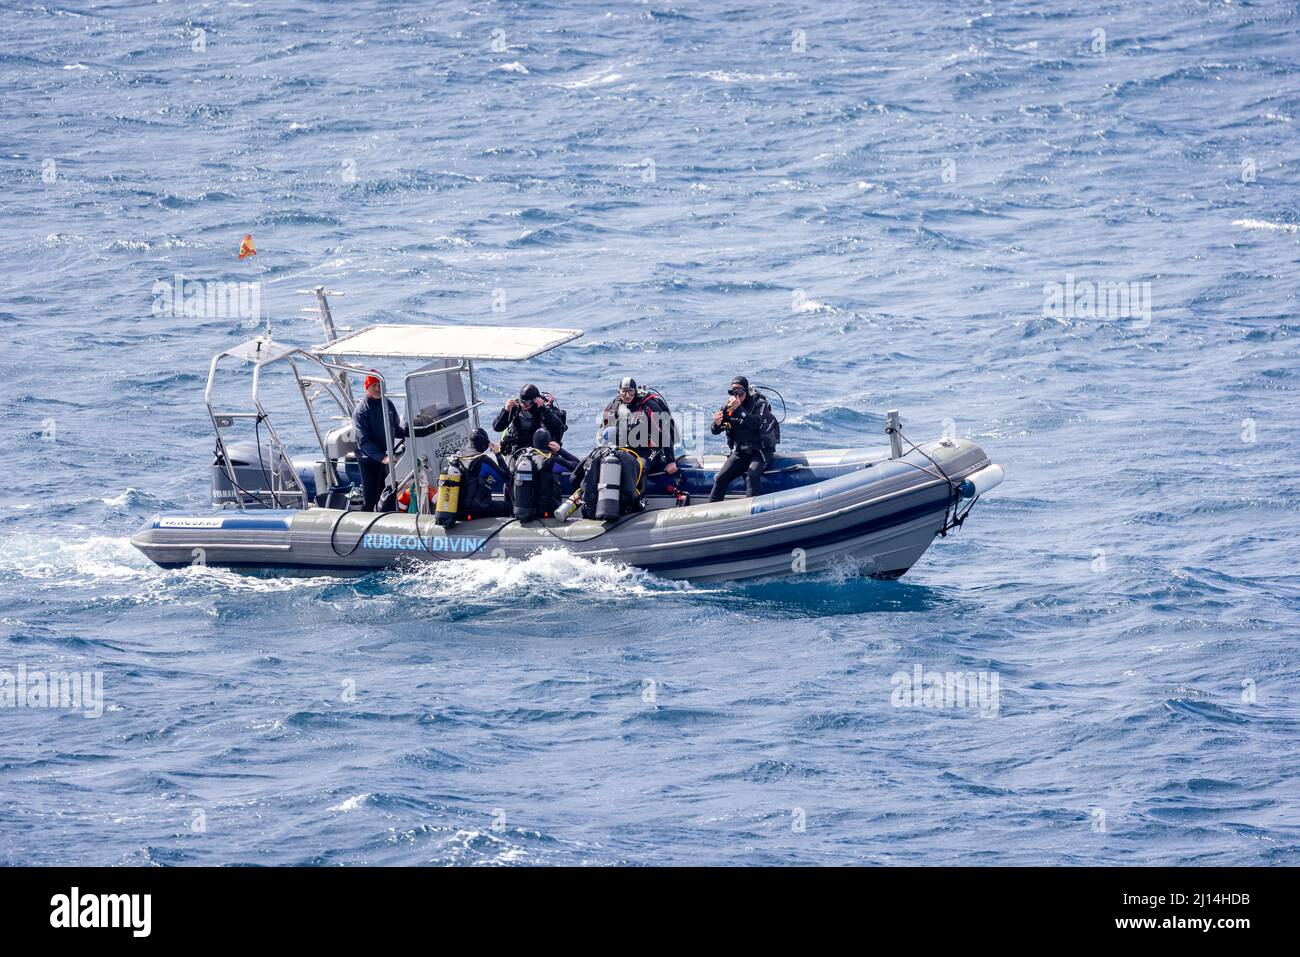 Group of scuba divers on RIB preparing to dive at sea in Playa Blanca, Lanzarote, Spain on 14 March 2022 Stock Photo